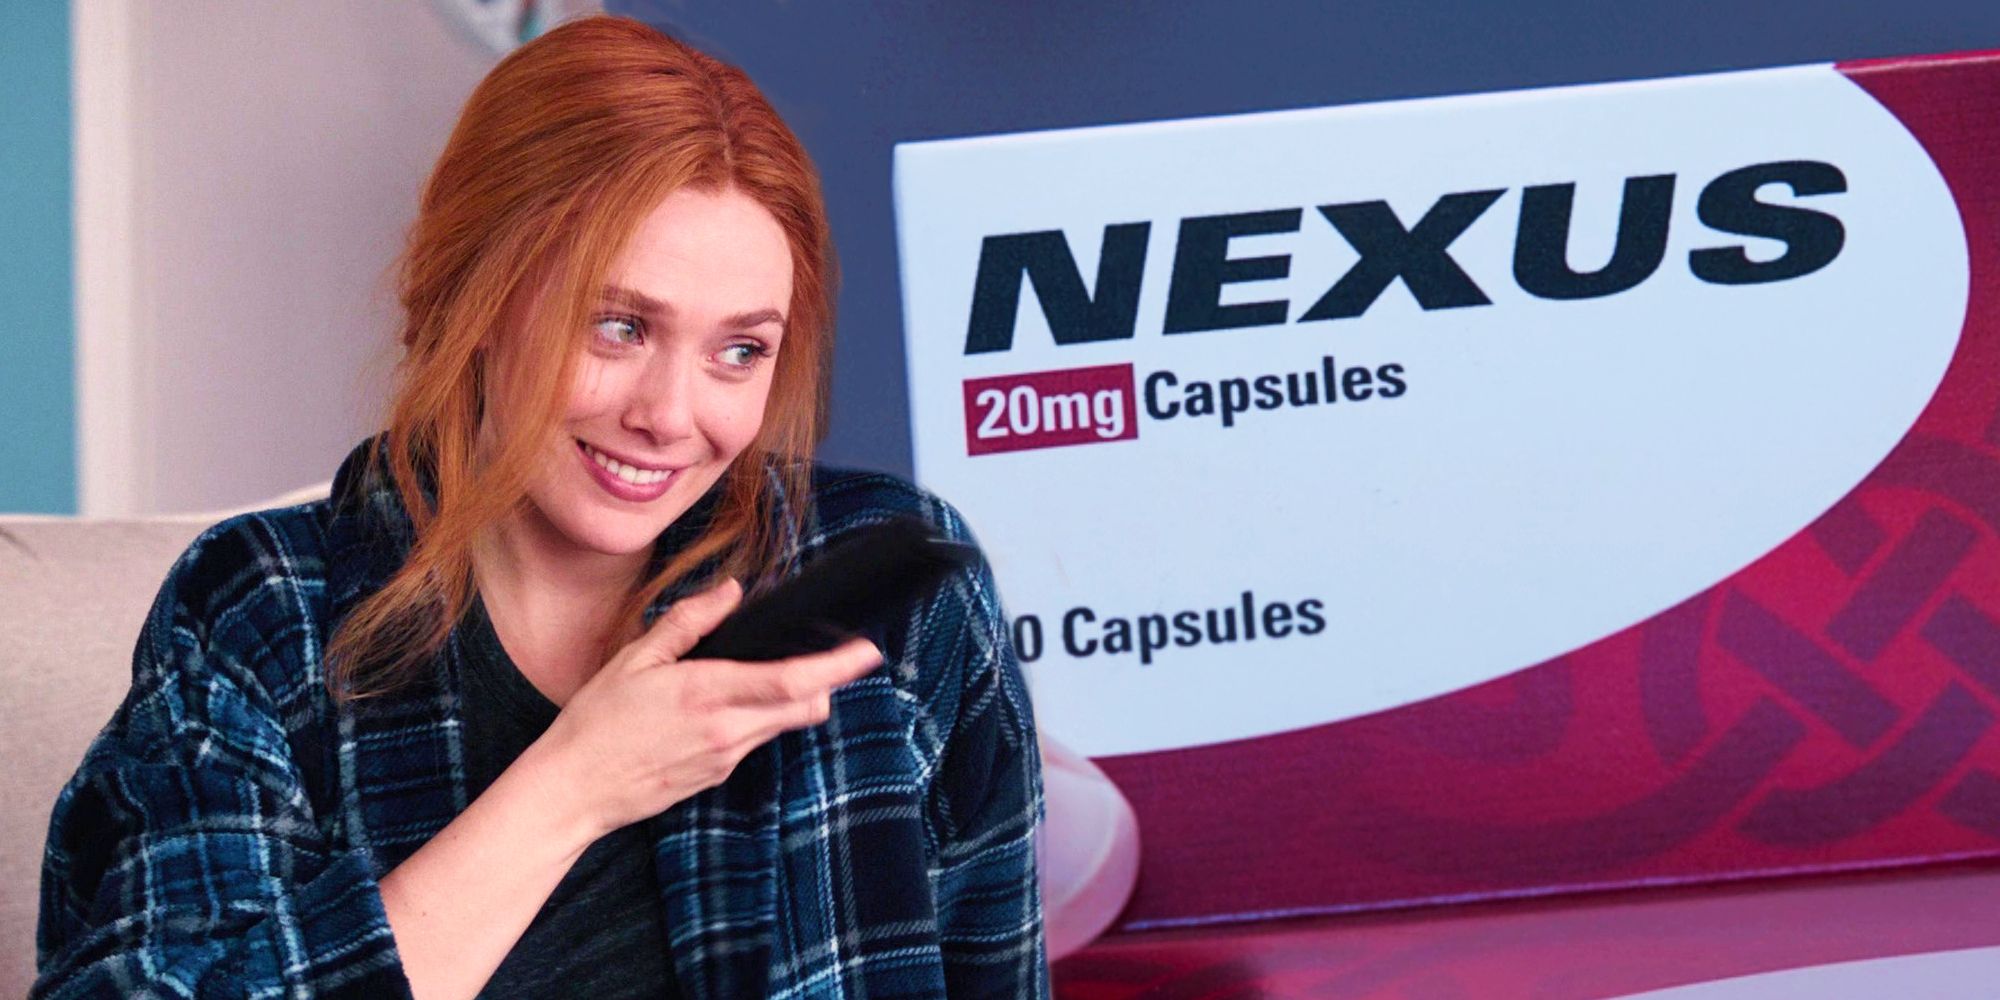 Wanda looks gleeful with the TV remote next to a packet of Nexus pills.